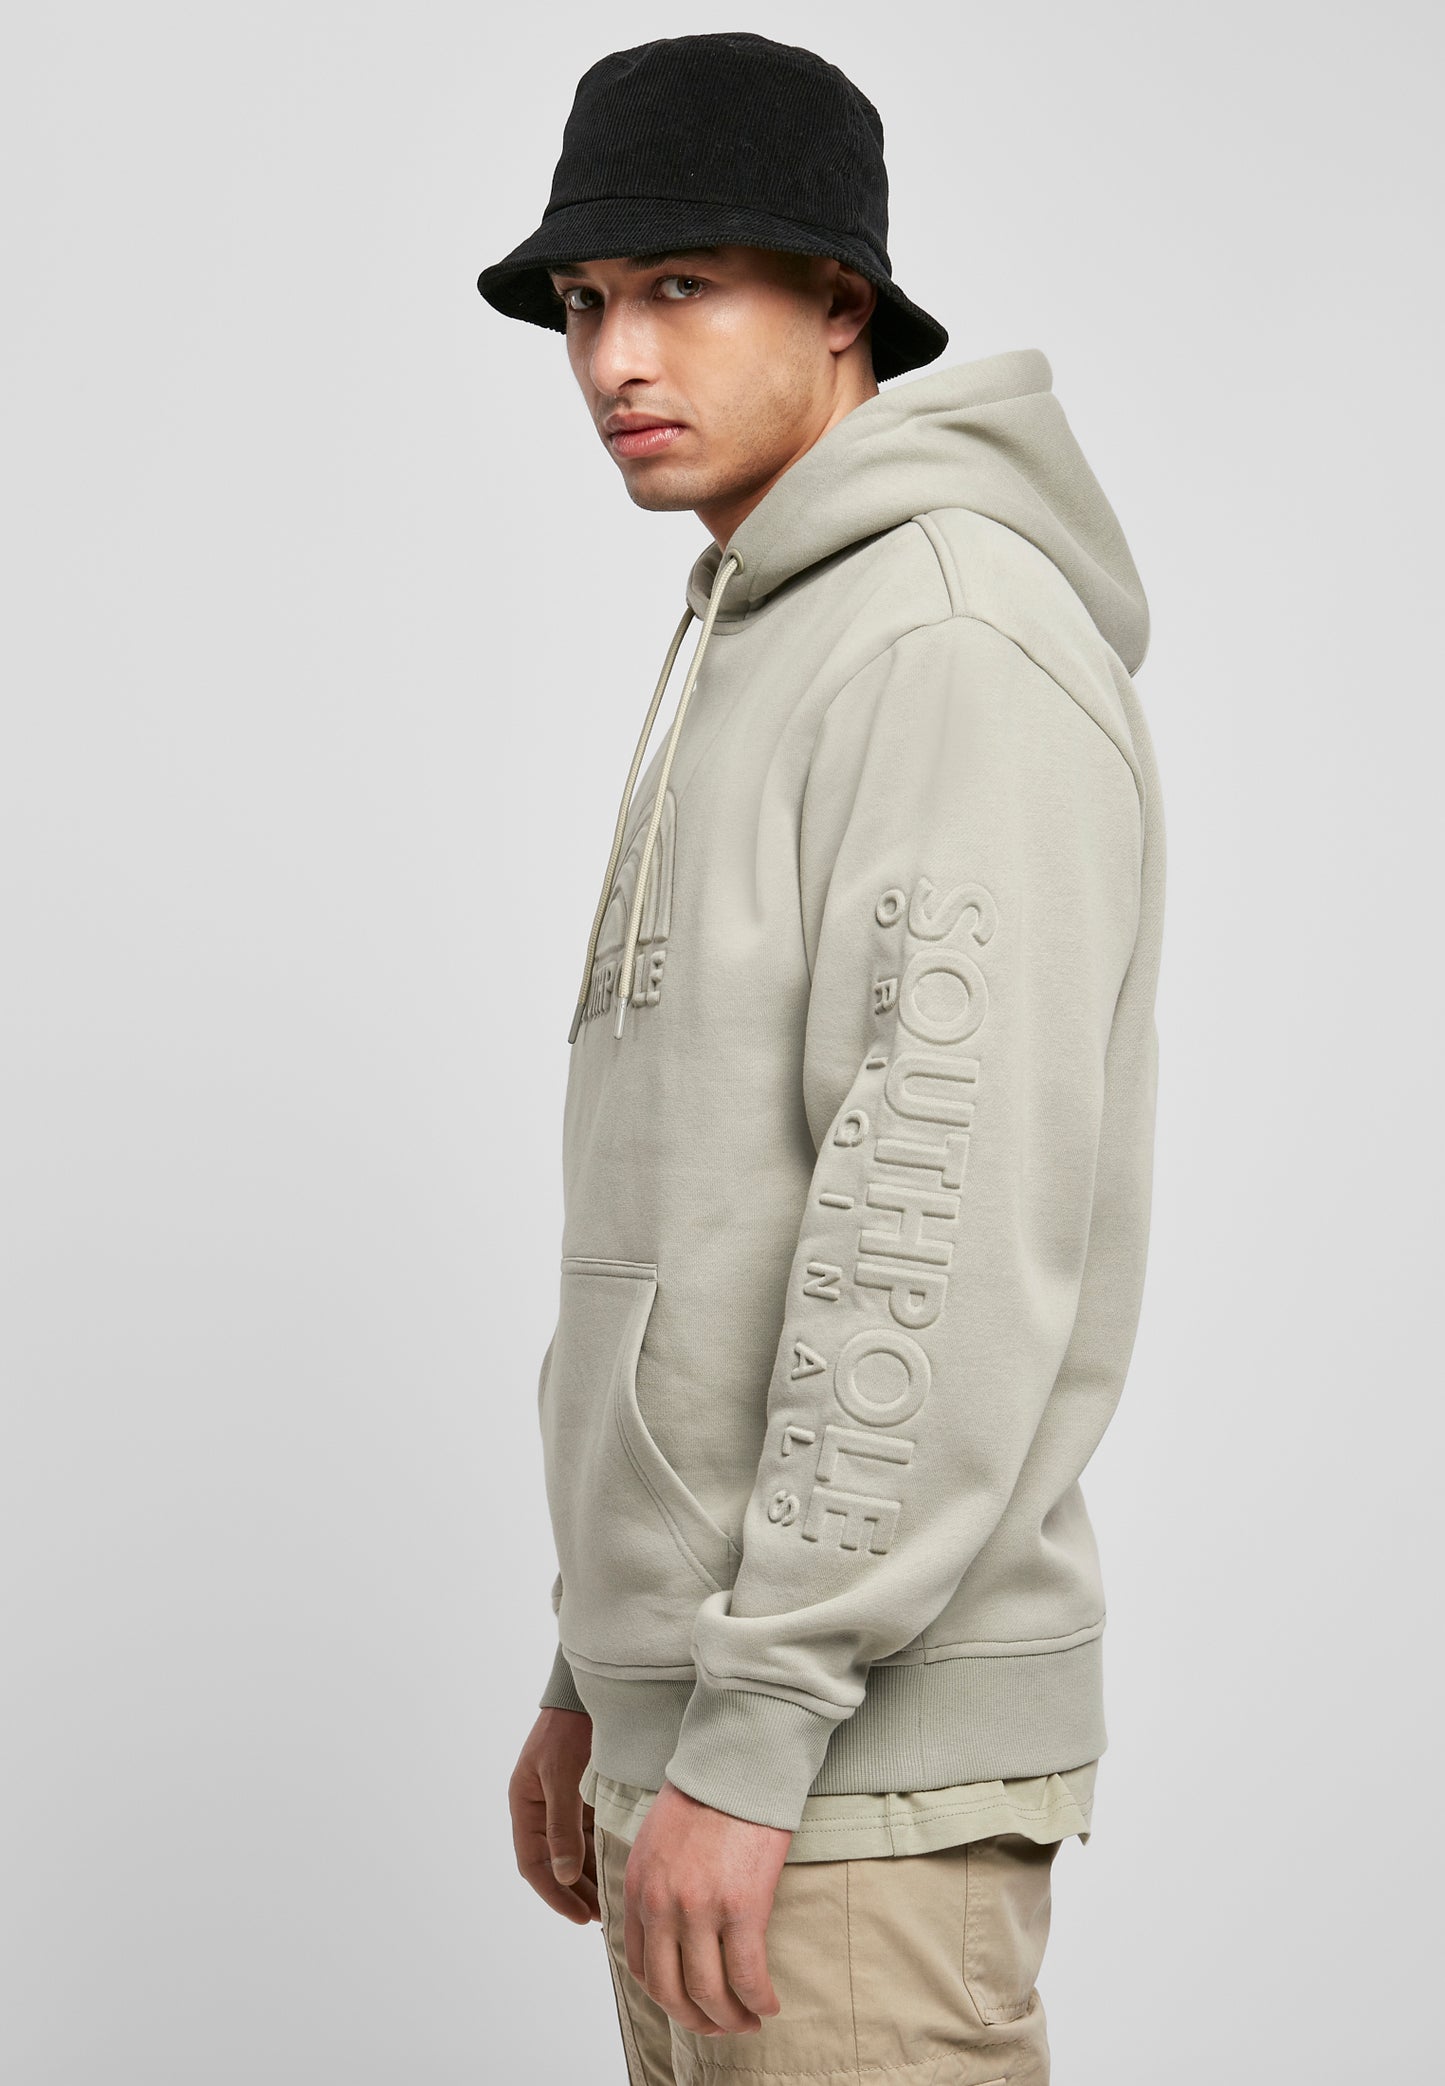 Southpole 3D Print Hoody in Teagreen